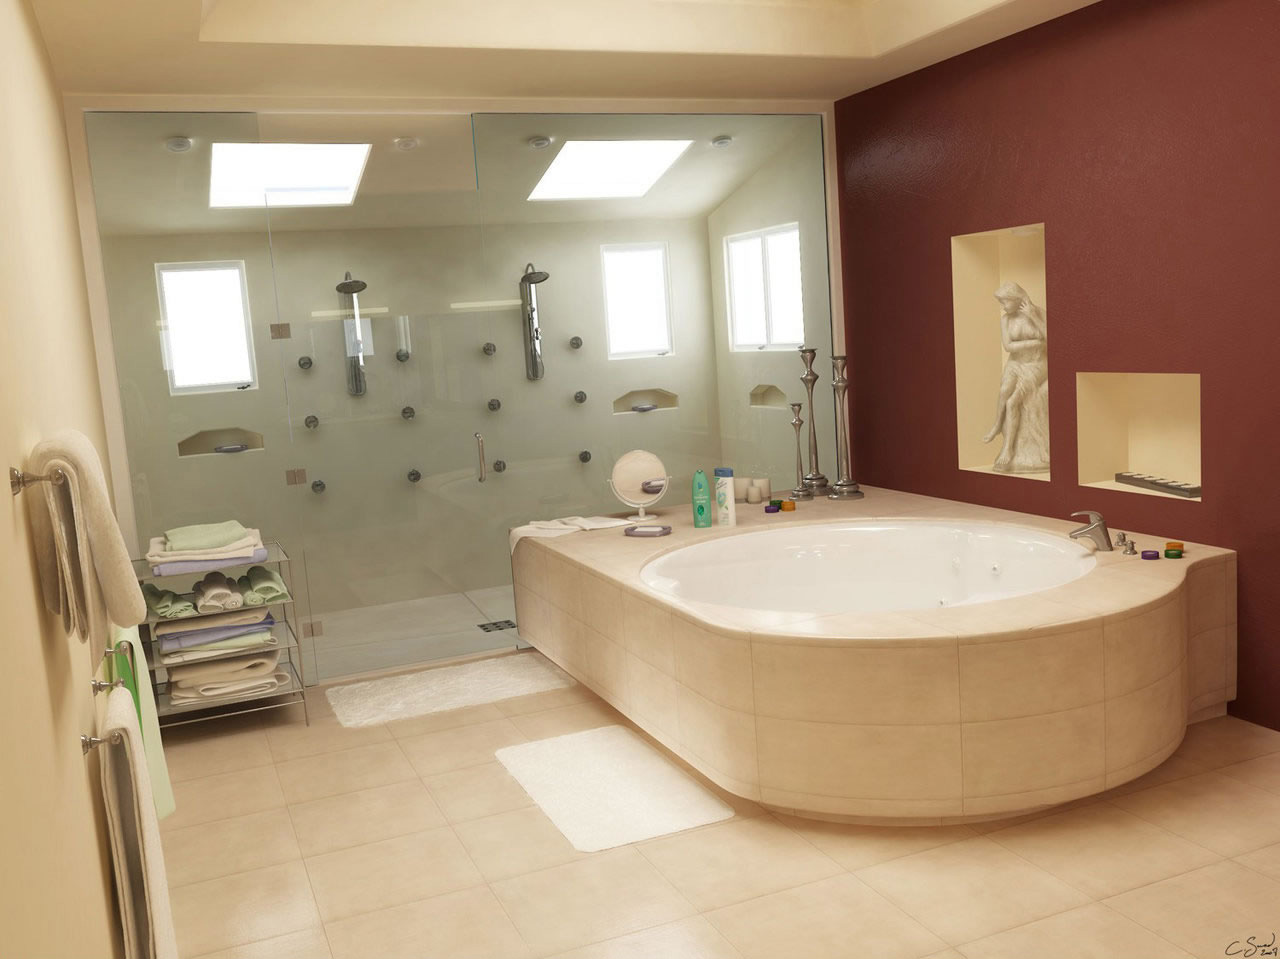 Round Design Also Modern Round Design Spacious Bathtub Also Minimalist Brown Bathroom Wall Color Along With Smoothing Bathroom Ceramic Flooring Design Together With Modern Bathroom Light Fixtures Design Ideas Bathroom 16 Bathroom Light Fixtures To Inspire Your Bathroom Makeover